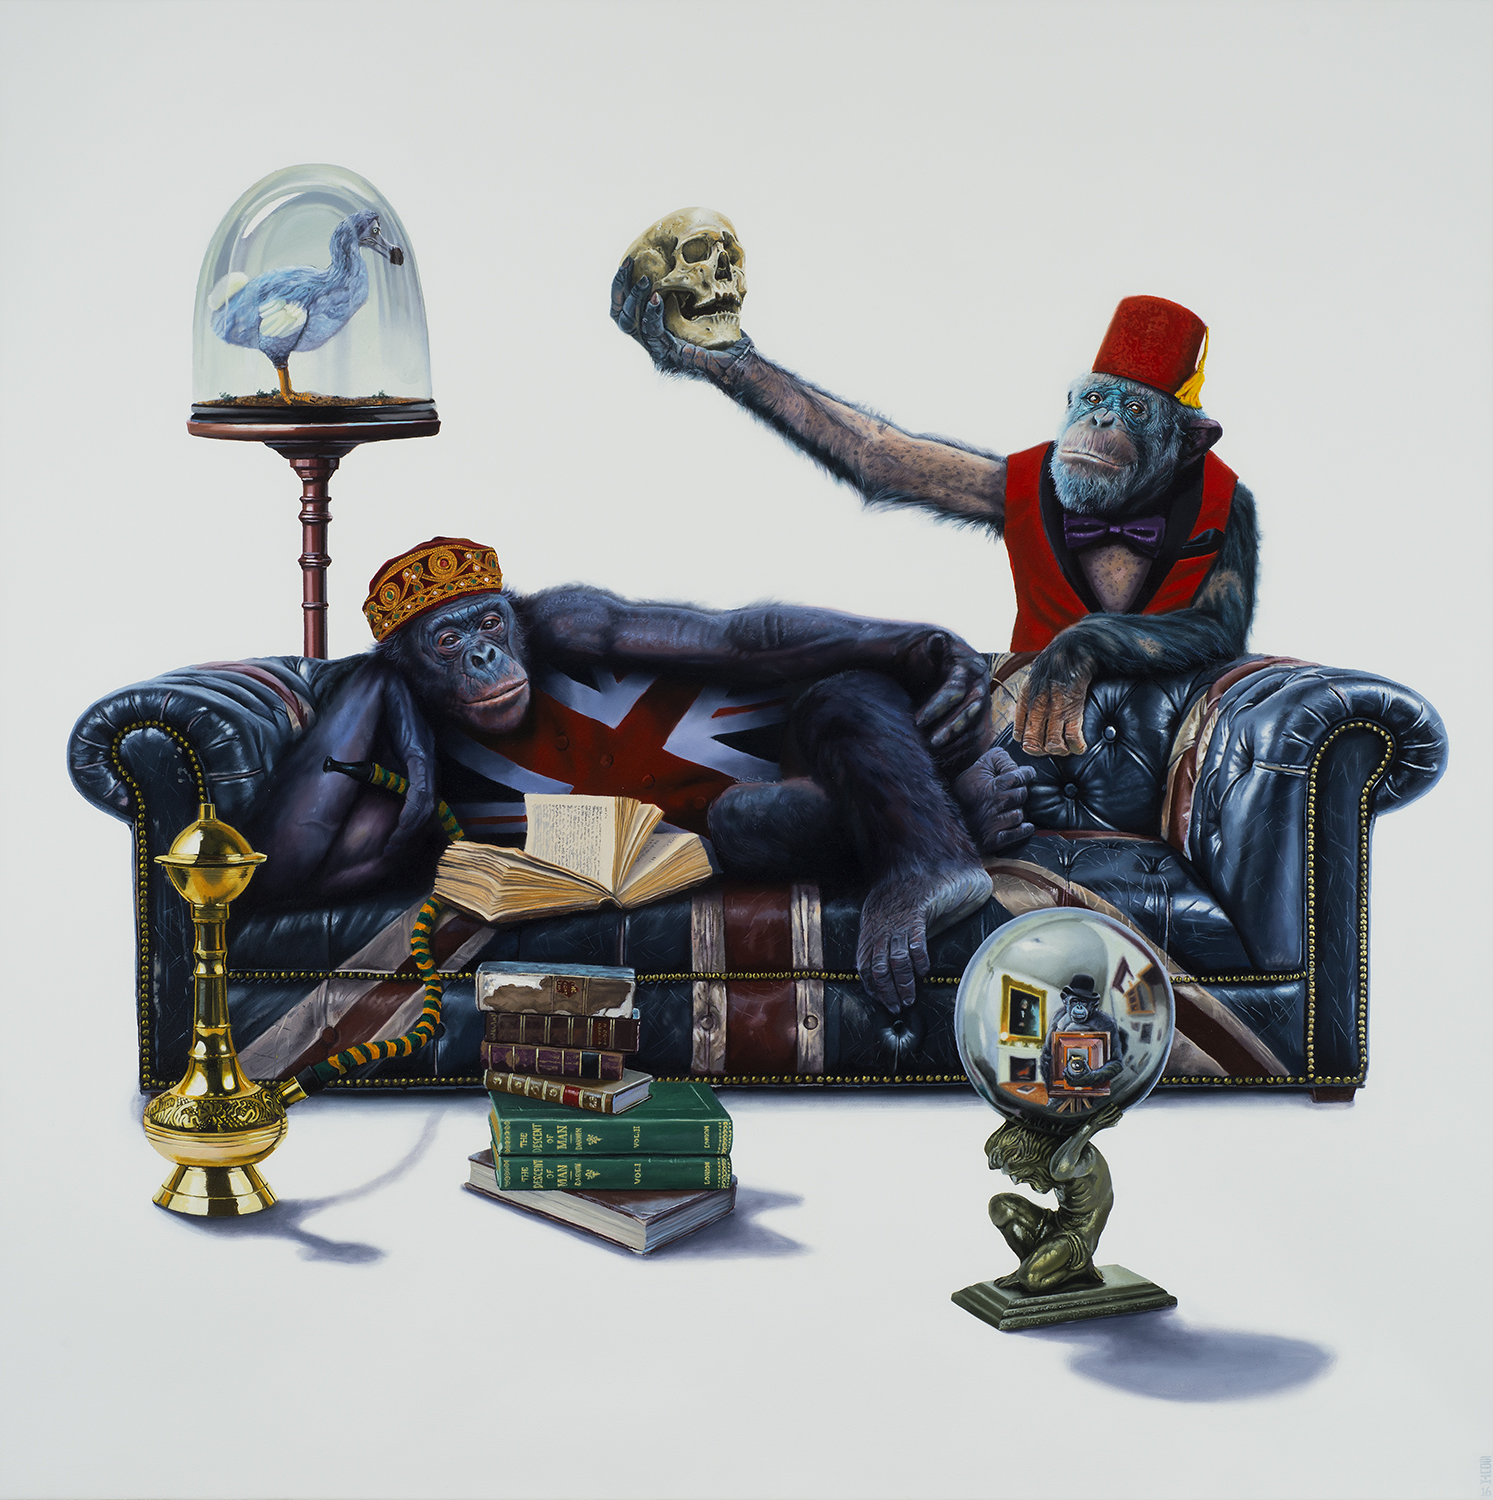 Two monkeys seated on a couch, one holding a scull the other reading a book -Tony South - Scholars